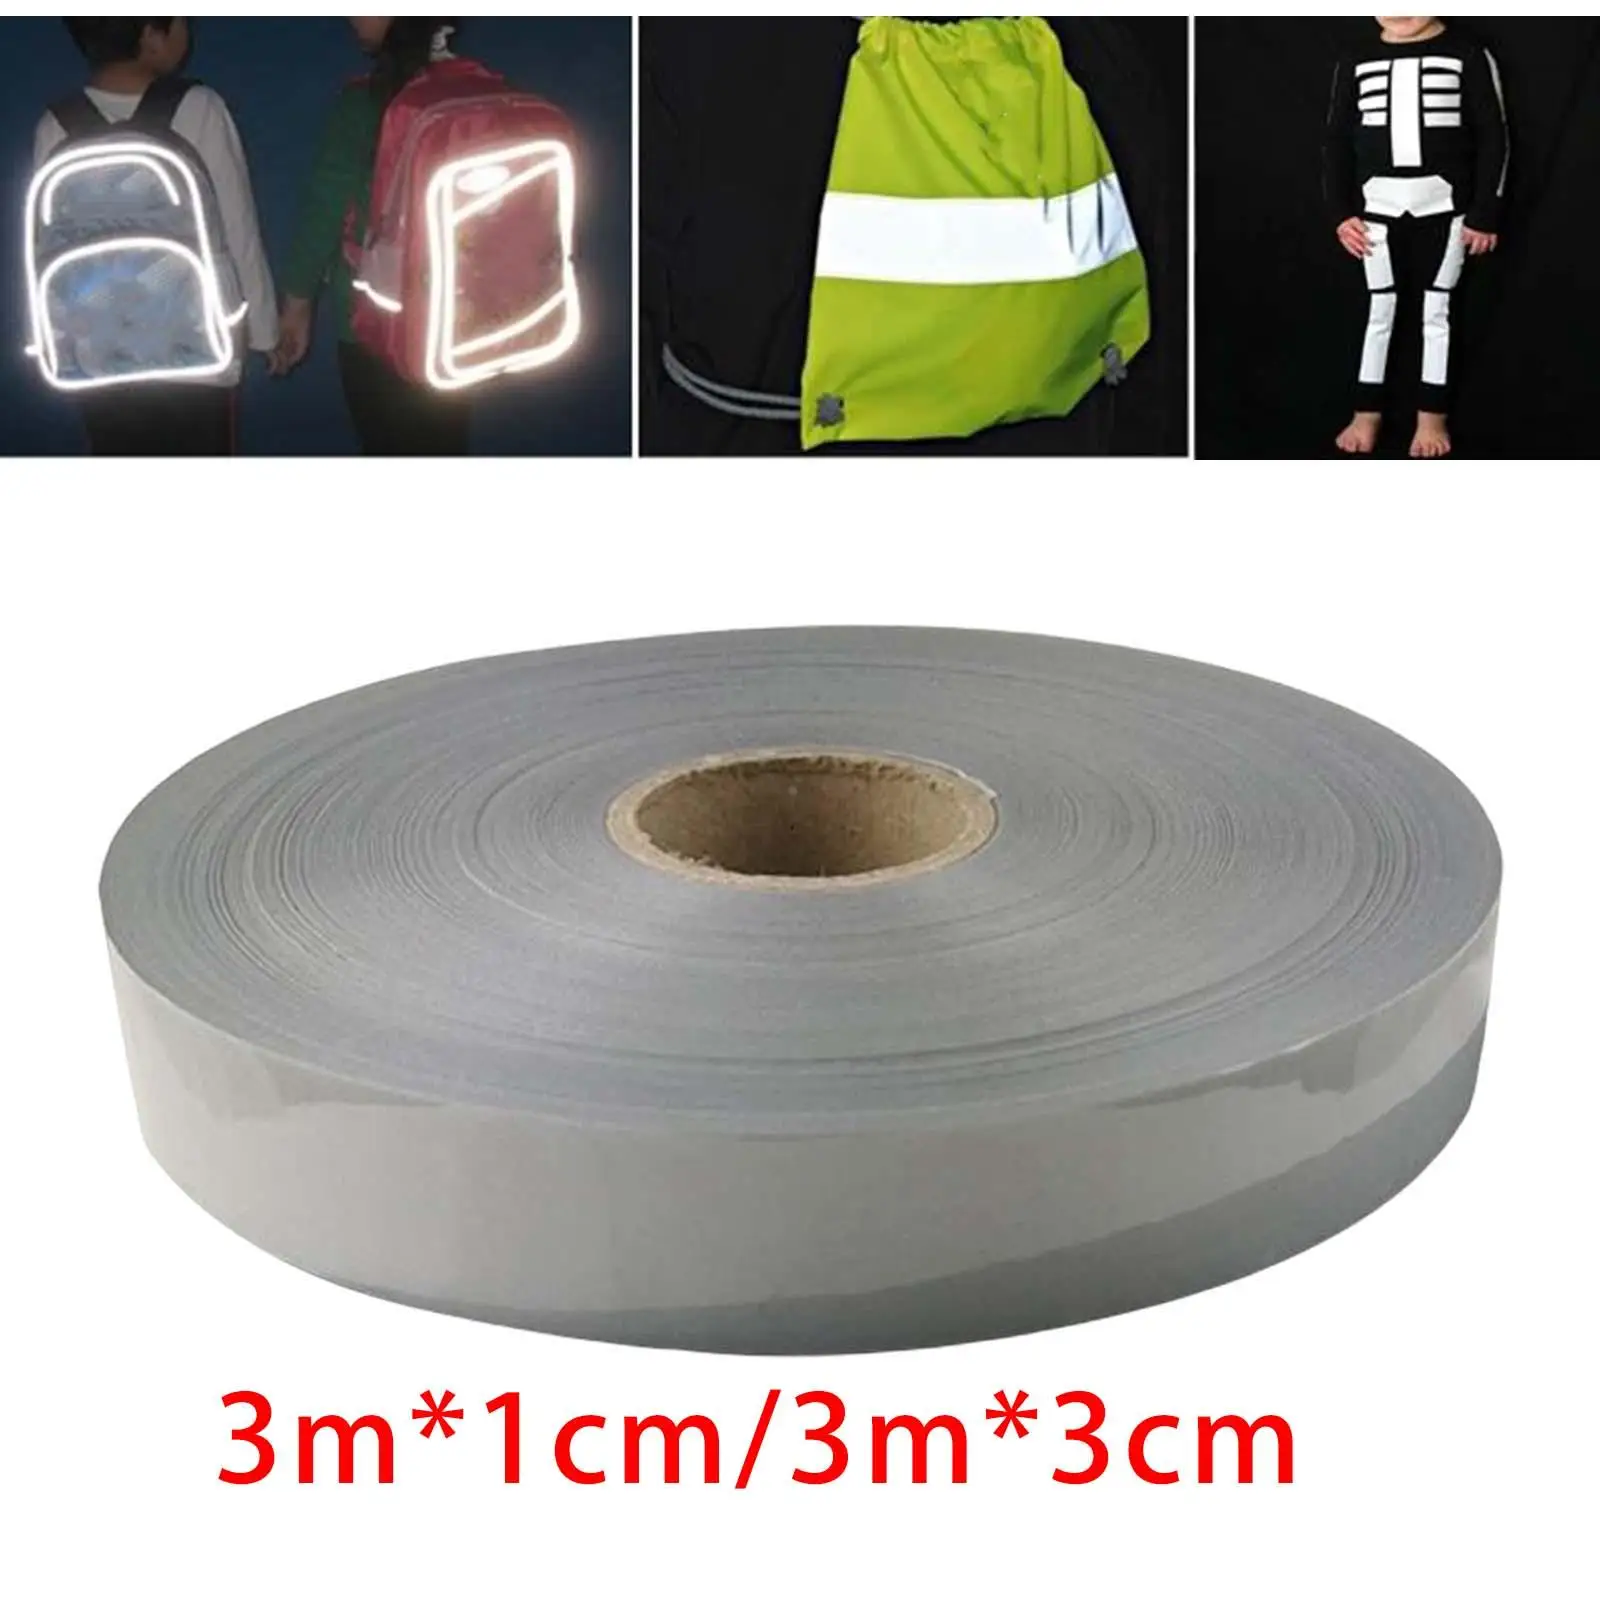 Iron On Reflective Tape Heat Transfer Vinyl Warning Belt Durable Reflective Material for Clothing